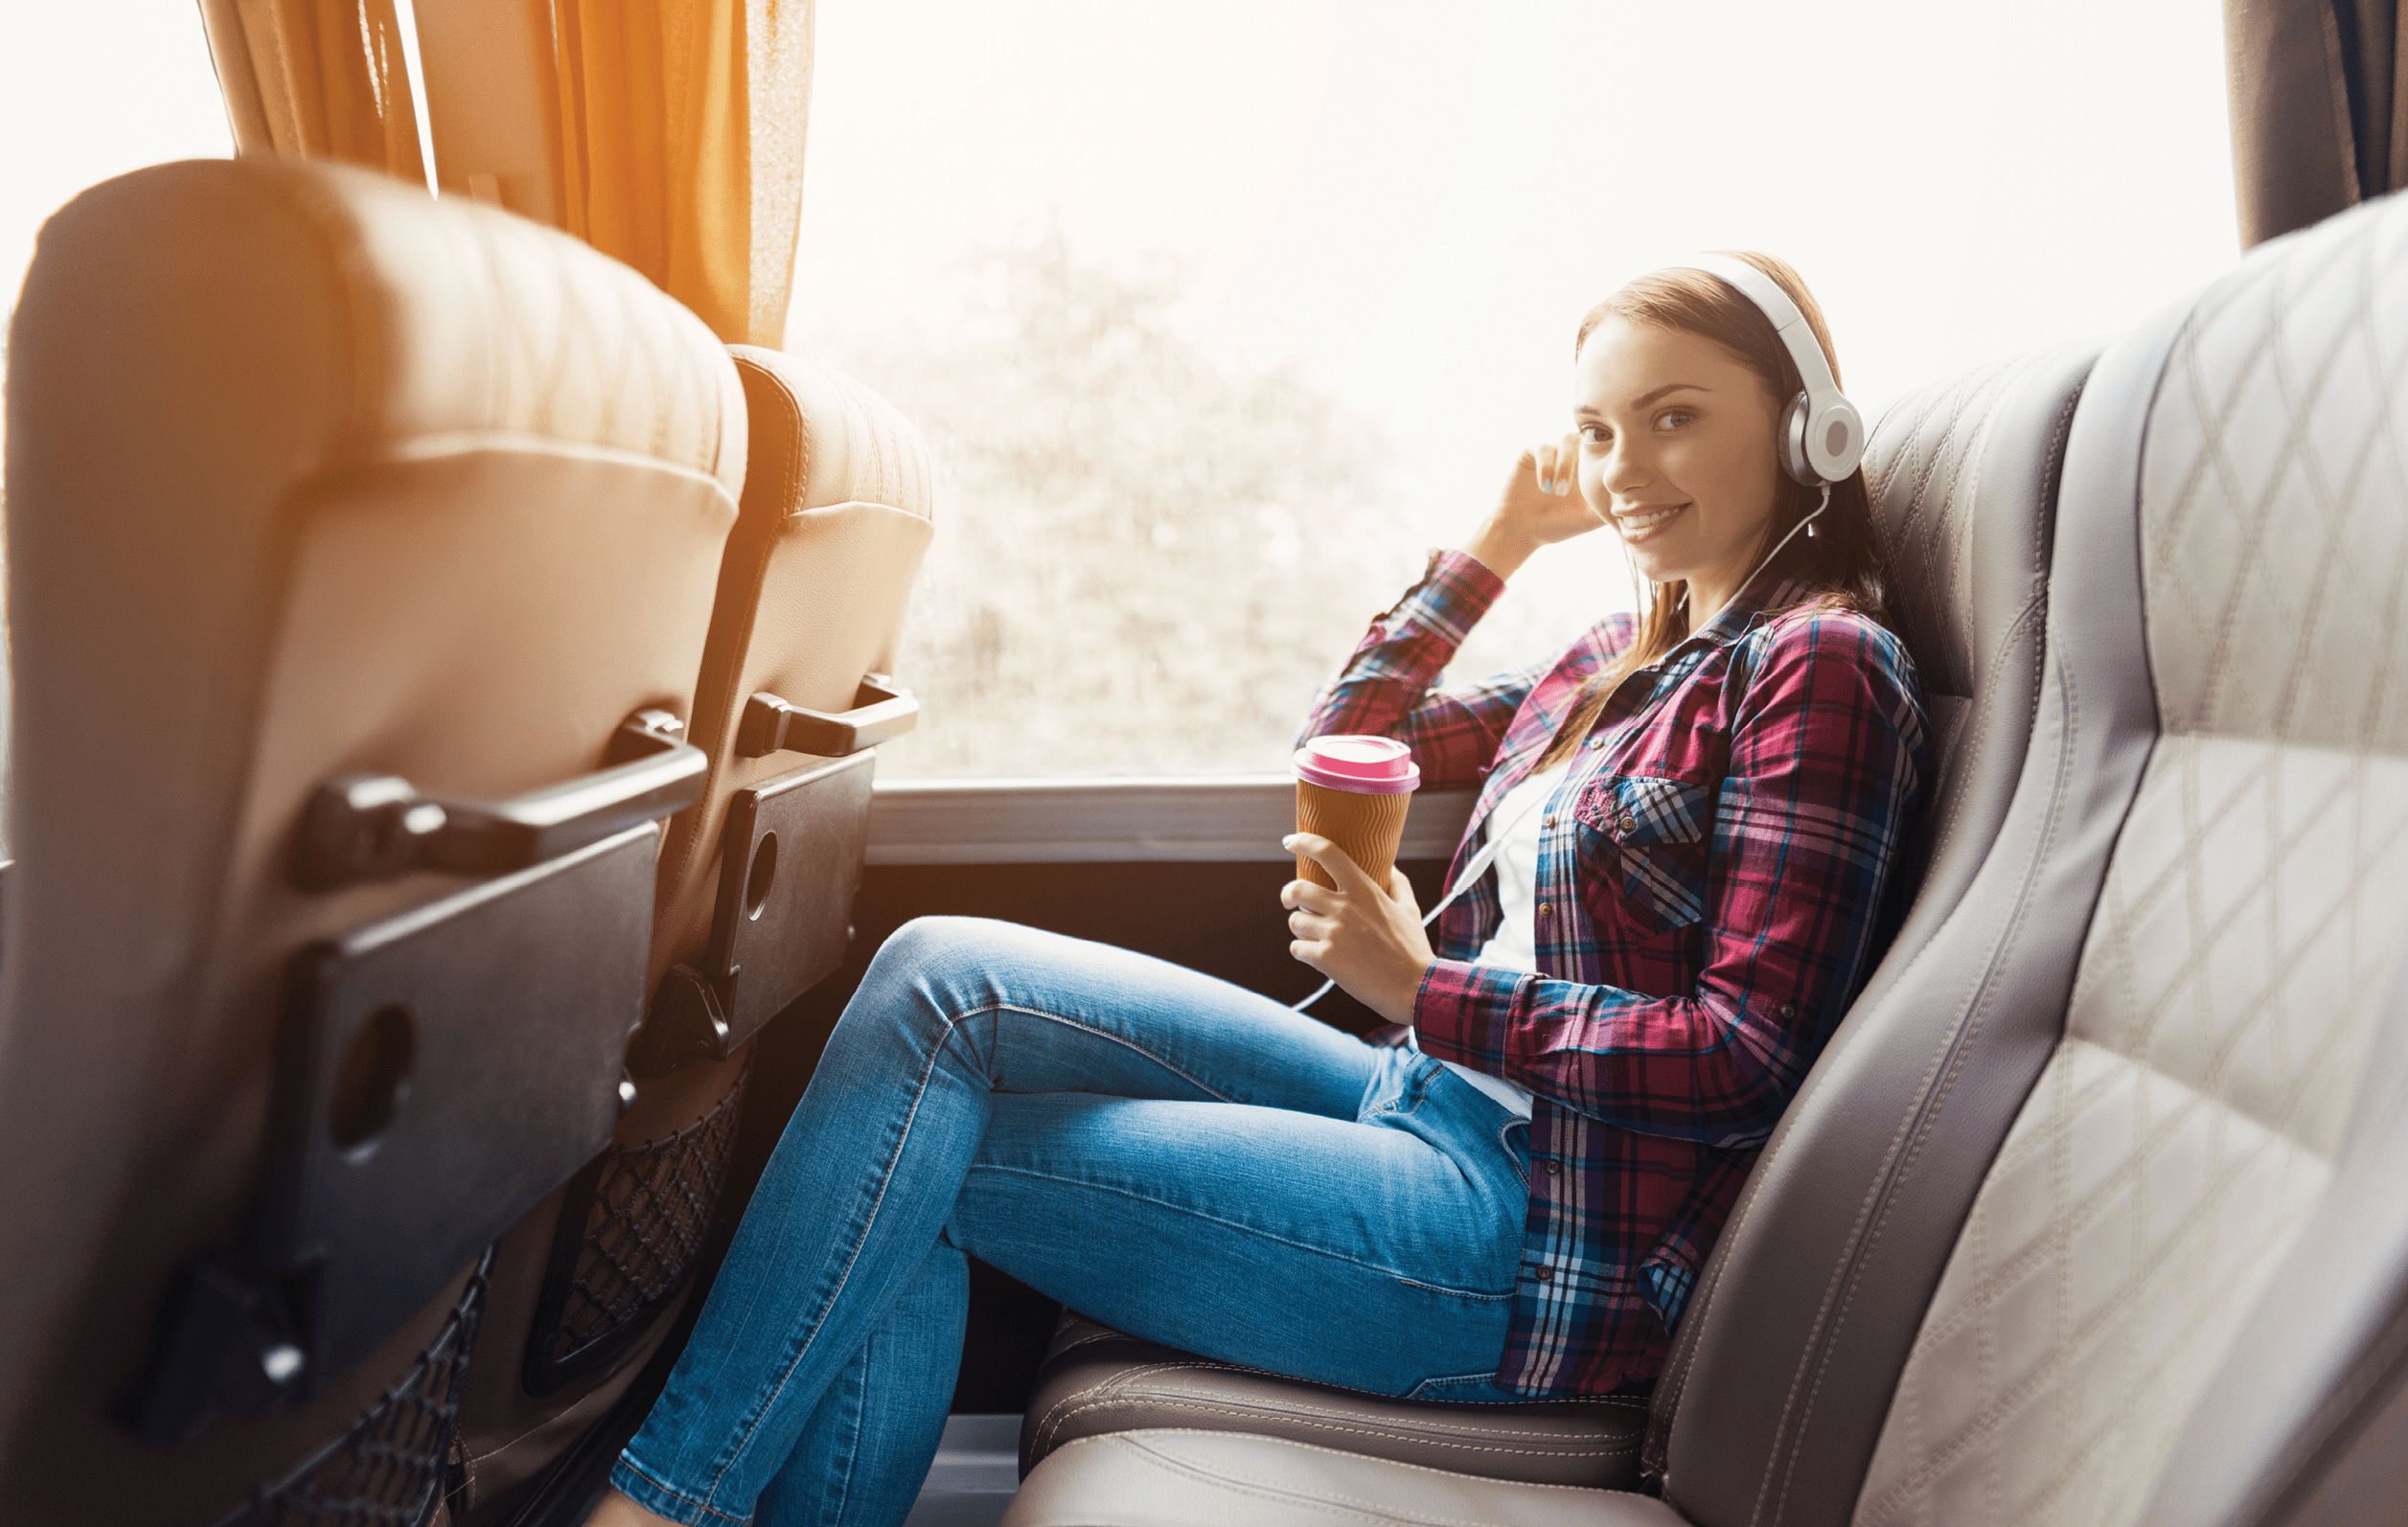 The woman on the passenger seat of the bus listens to music and drinks coffee. She looks out the window and smiles. Outside the window is a beautiful green landscape. 878483660 traveler, country, background, holiday, trip, urban, vacation, white, downtown, view, young, woman, happy, man, concept, lifestyle, person, casual, baggage, sightseeing, outdoor, object, landmark, transport